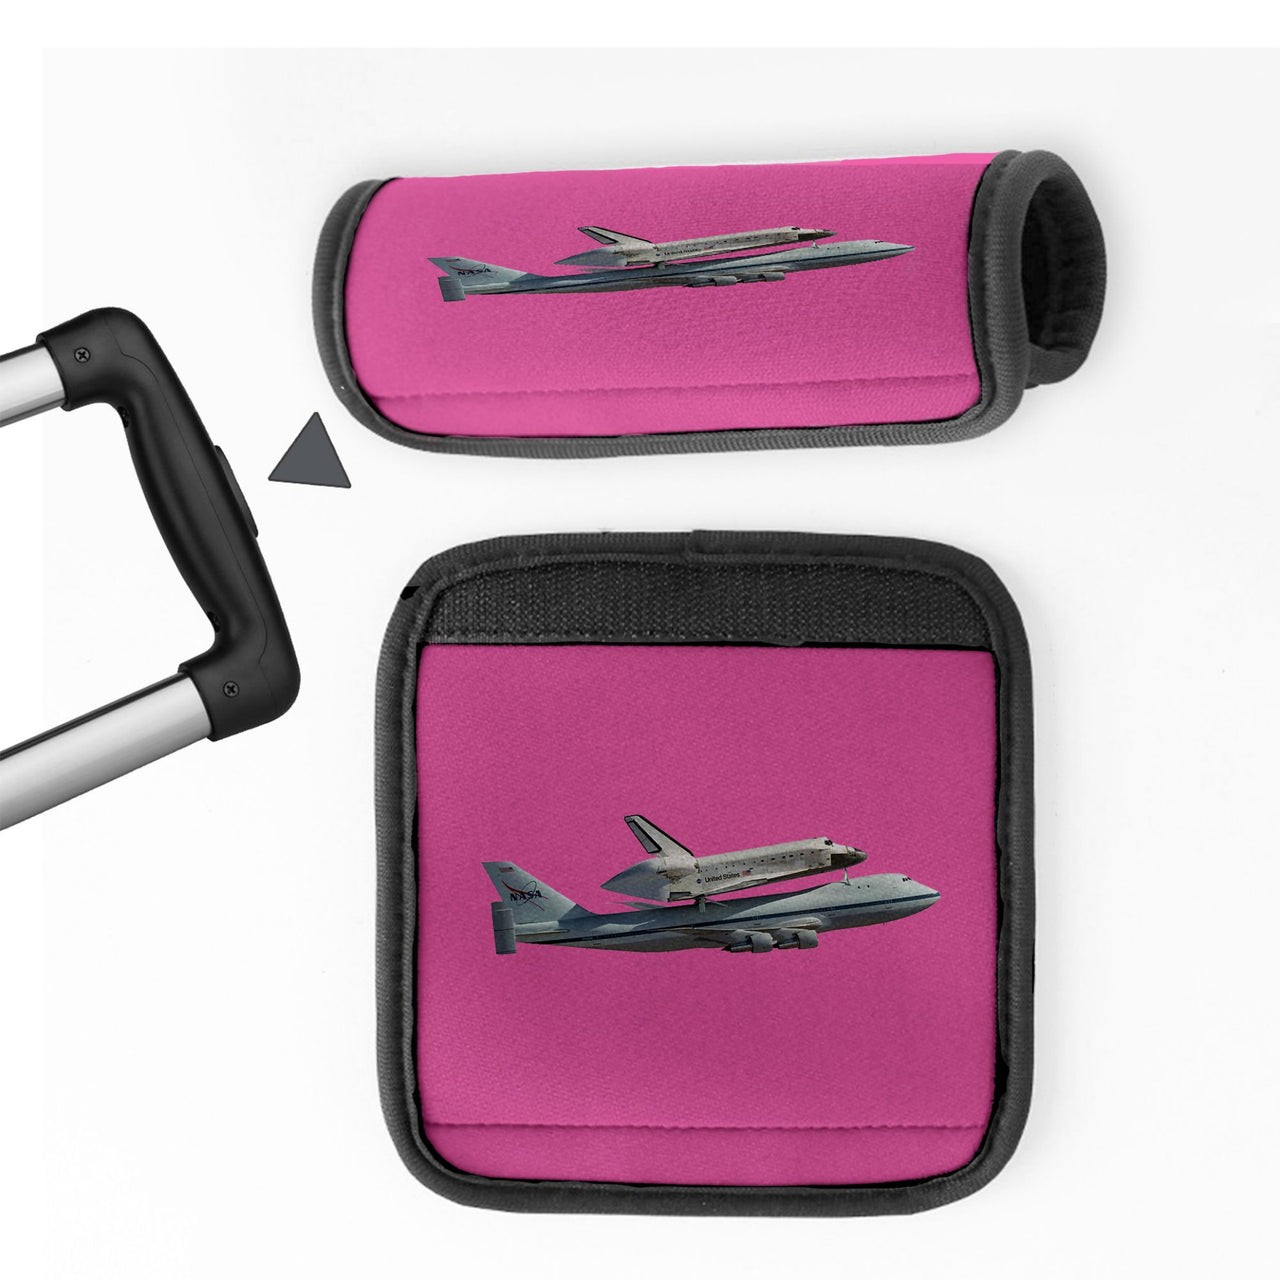 Space shuttle on 747 Designed Neoprene Luggage Handle Covers